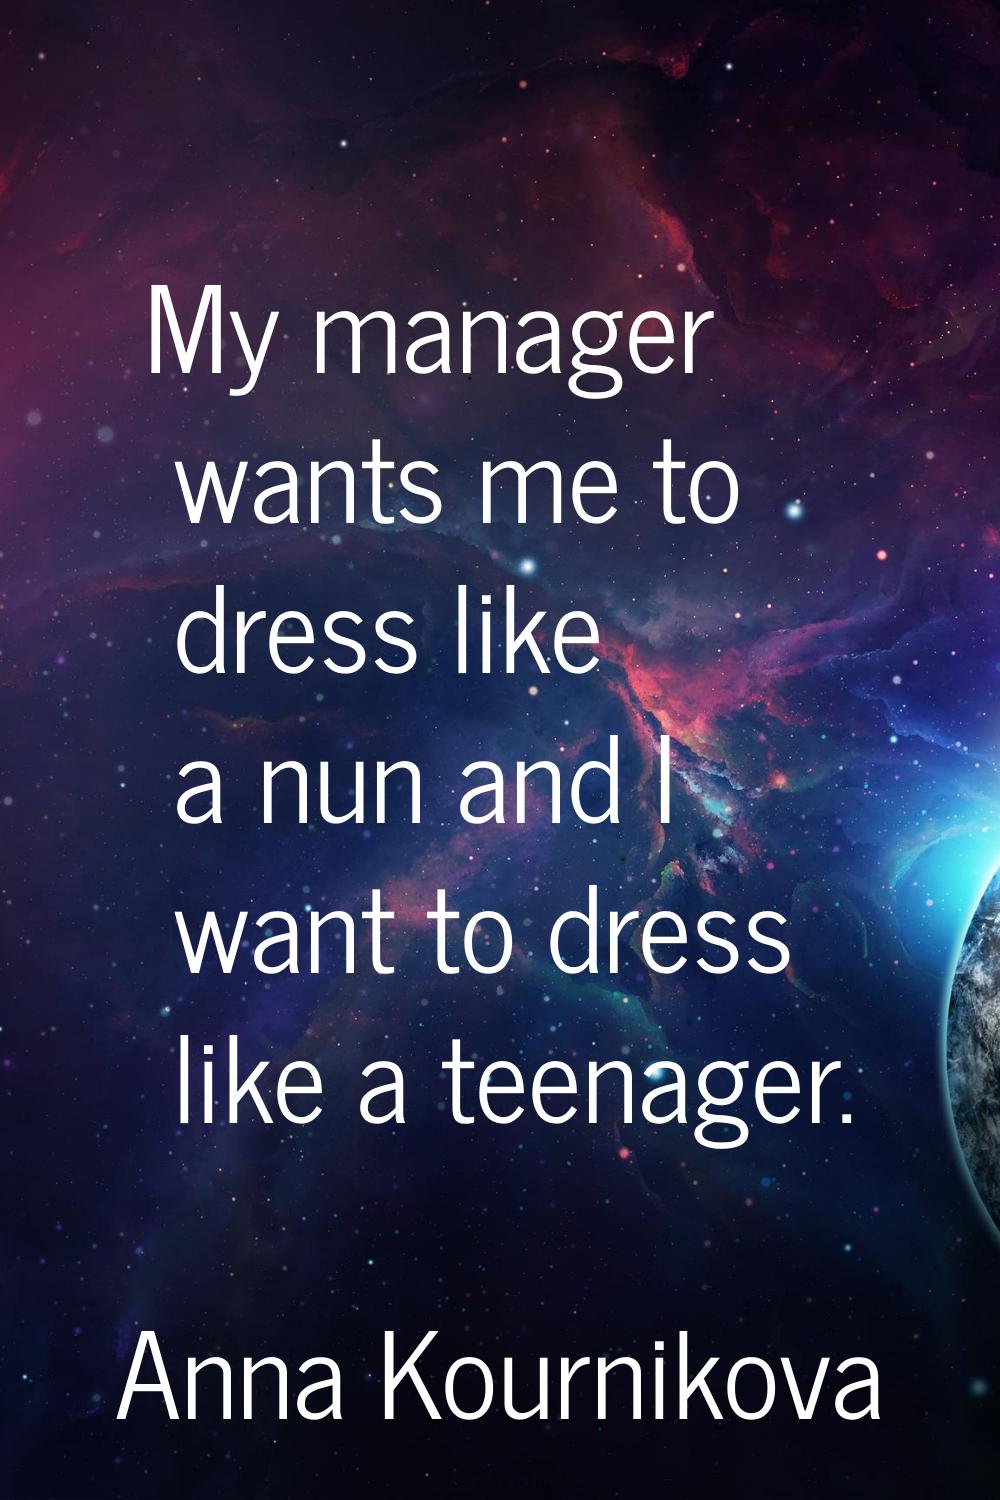 My manager wants me to dress like a nun and I want to dress like a teenager.